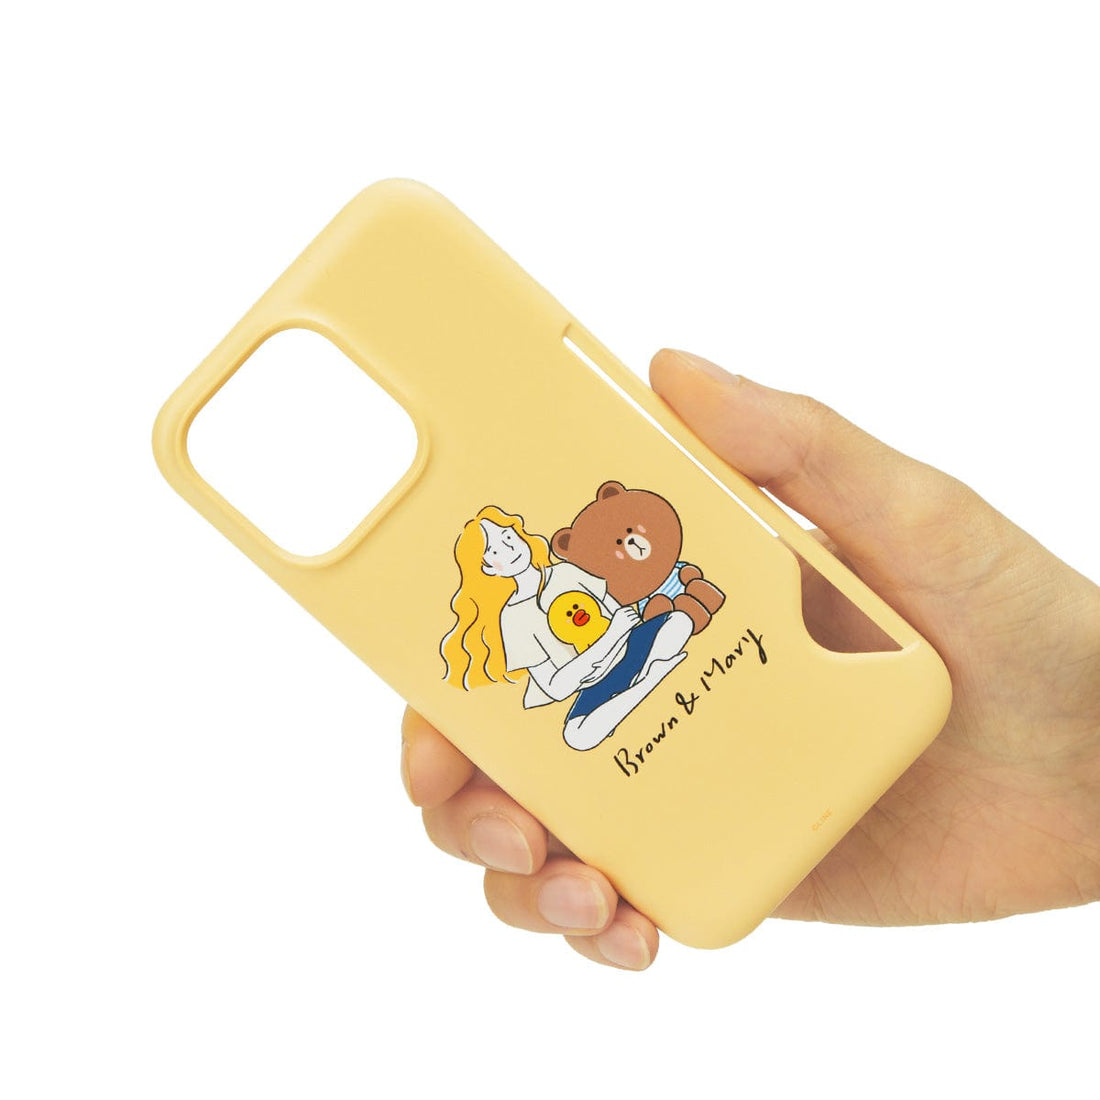 LINE FRIENDS LIVING LINE FRIENDS BROWN DRAWING MARY YELLOW iPHONE CASE WITH CARD HOLDER